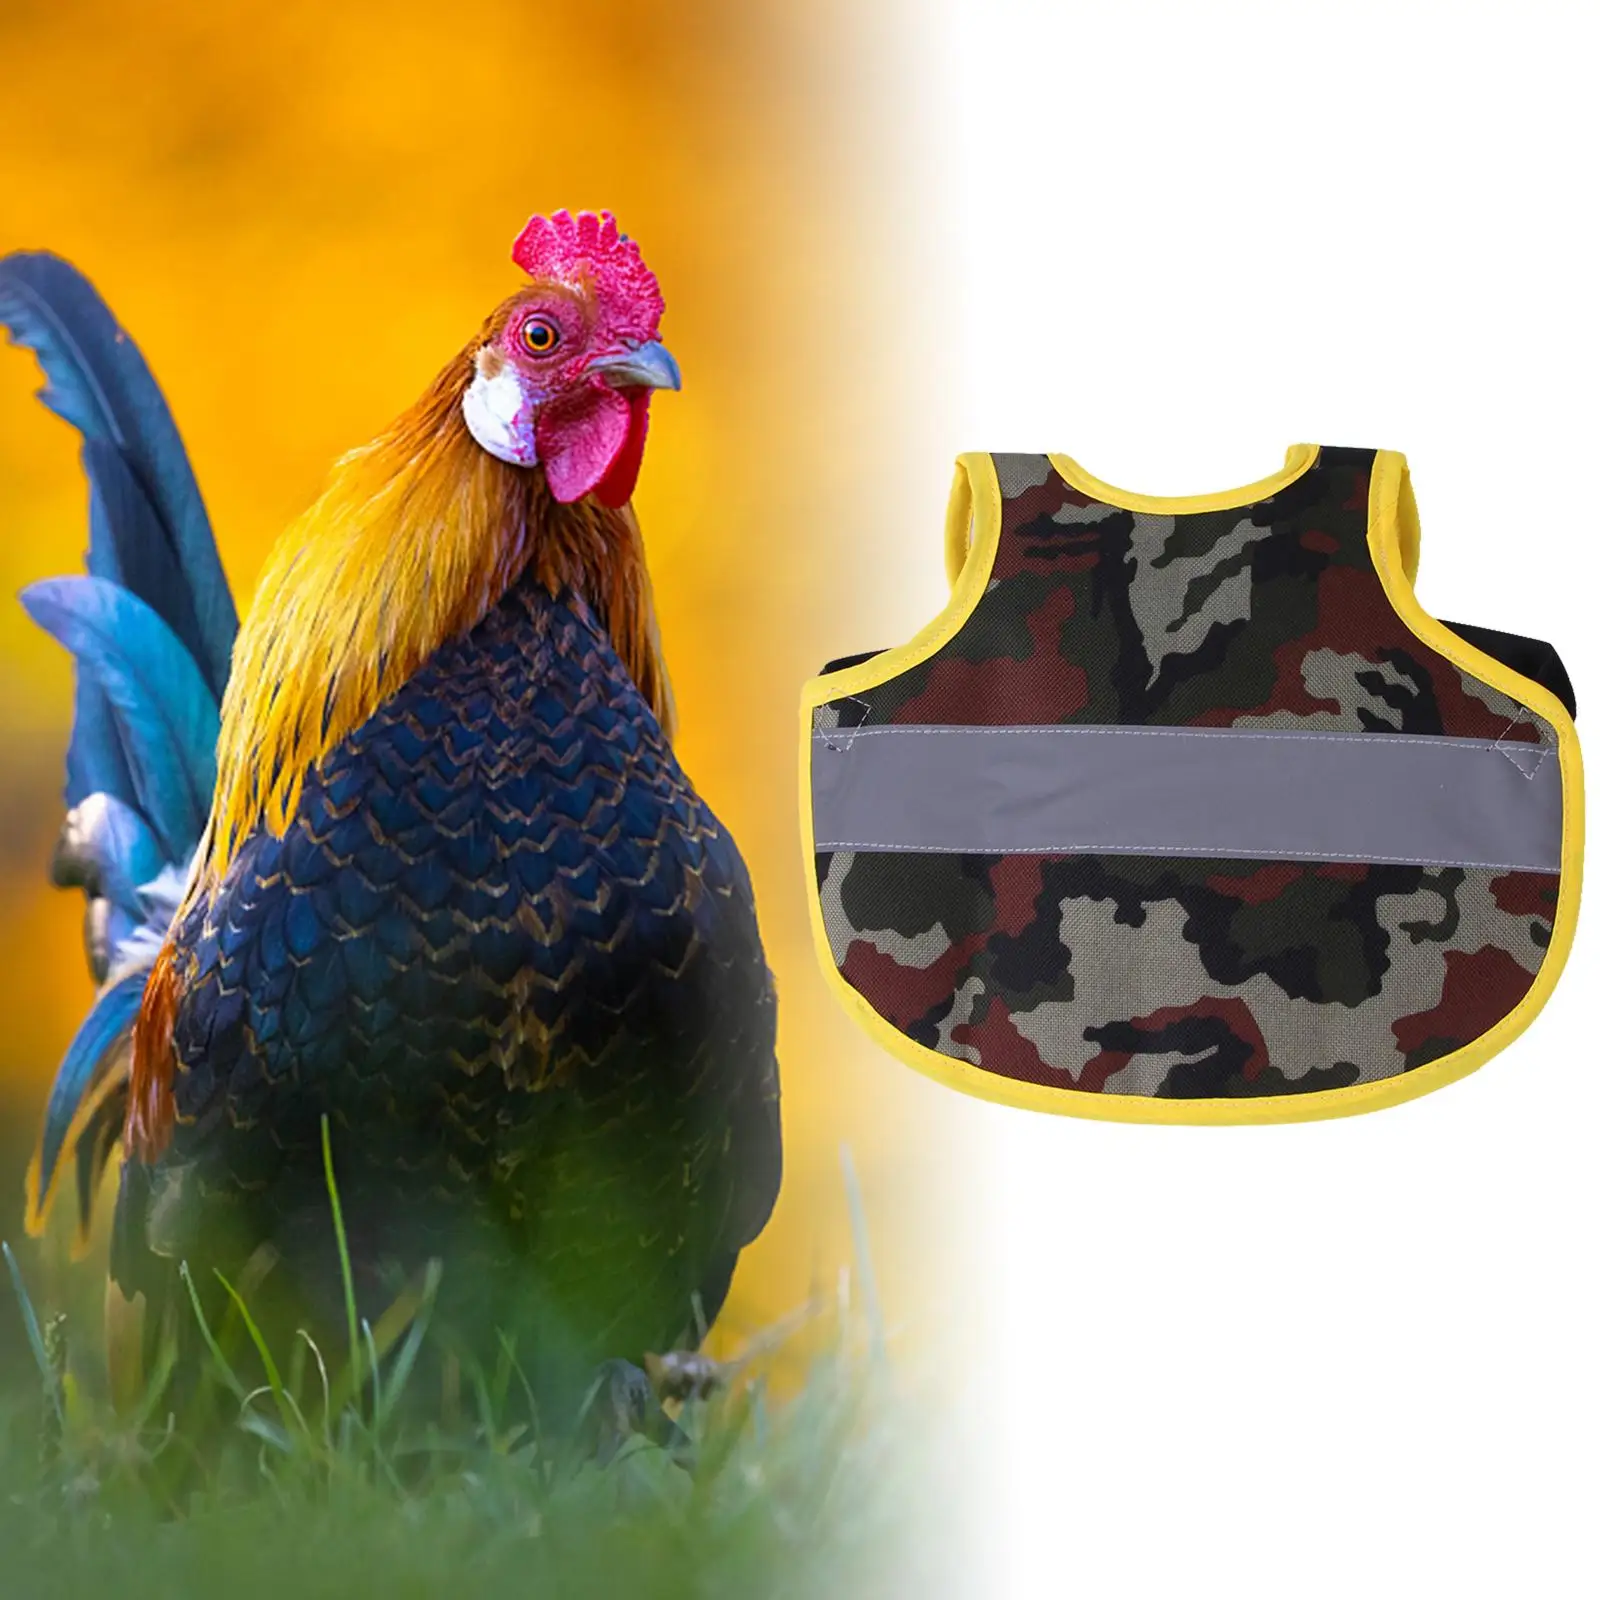 Adjustable Chicken Saddle Hen Apron Protect Wing Jacket Reflective Suit Protector Standard Size Suit Small Medium and Large Hens